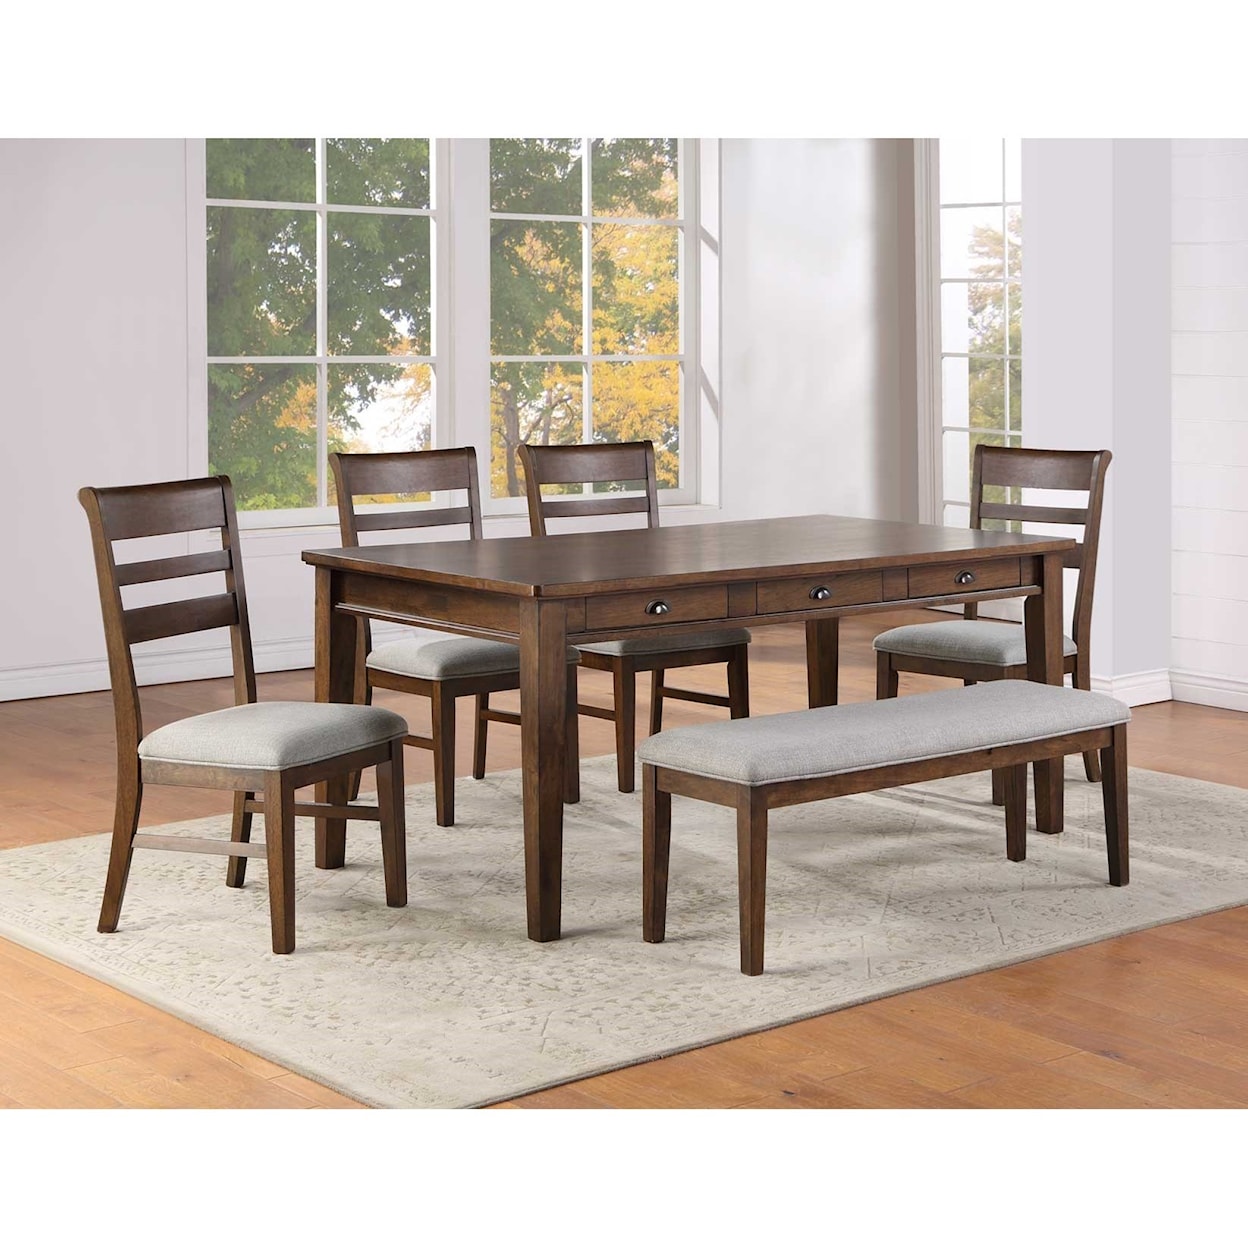 Steve Silver Ora 6-Piece Table, Chair, and Bench Set